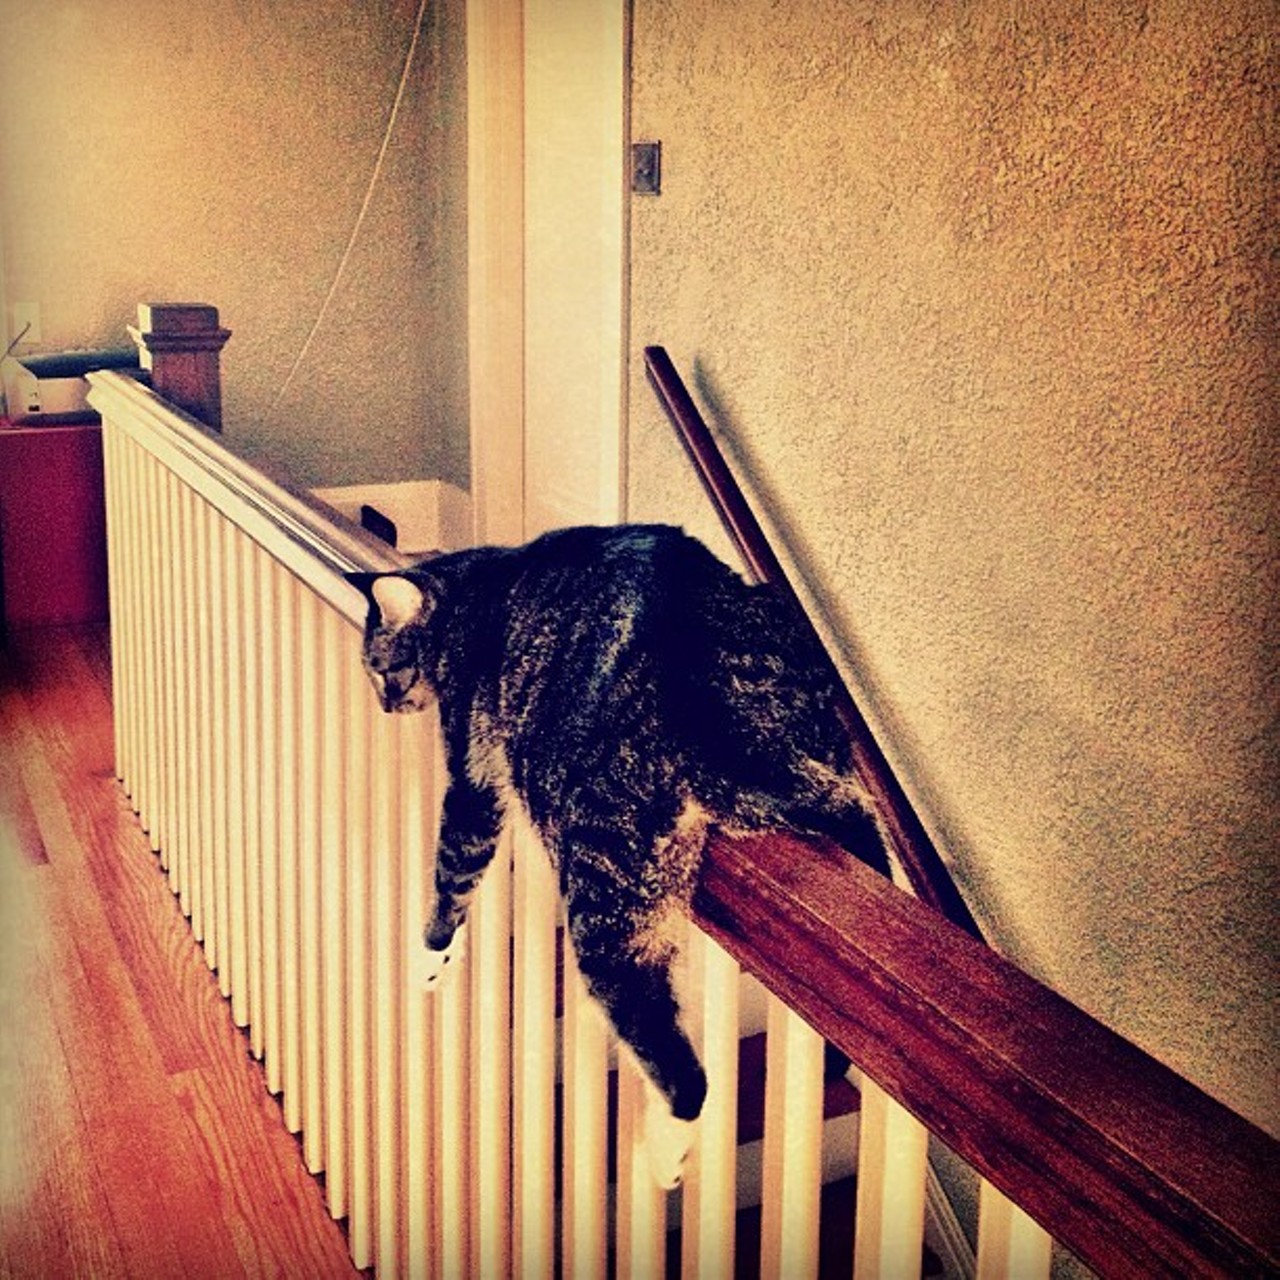 @seandammit
The last few #FridayMoonDog posts have included symbolic life lessons represented by seemingly simple #cat photos, but this week's message is a bit more literal: Strip naked and straddle your stair banister. If you don't have one, go to a friend's house and do this when they go to the bathroom. #moondog #mooney #pets #cute